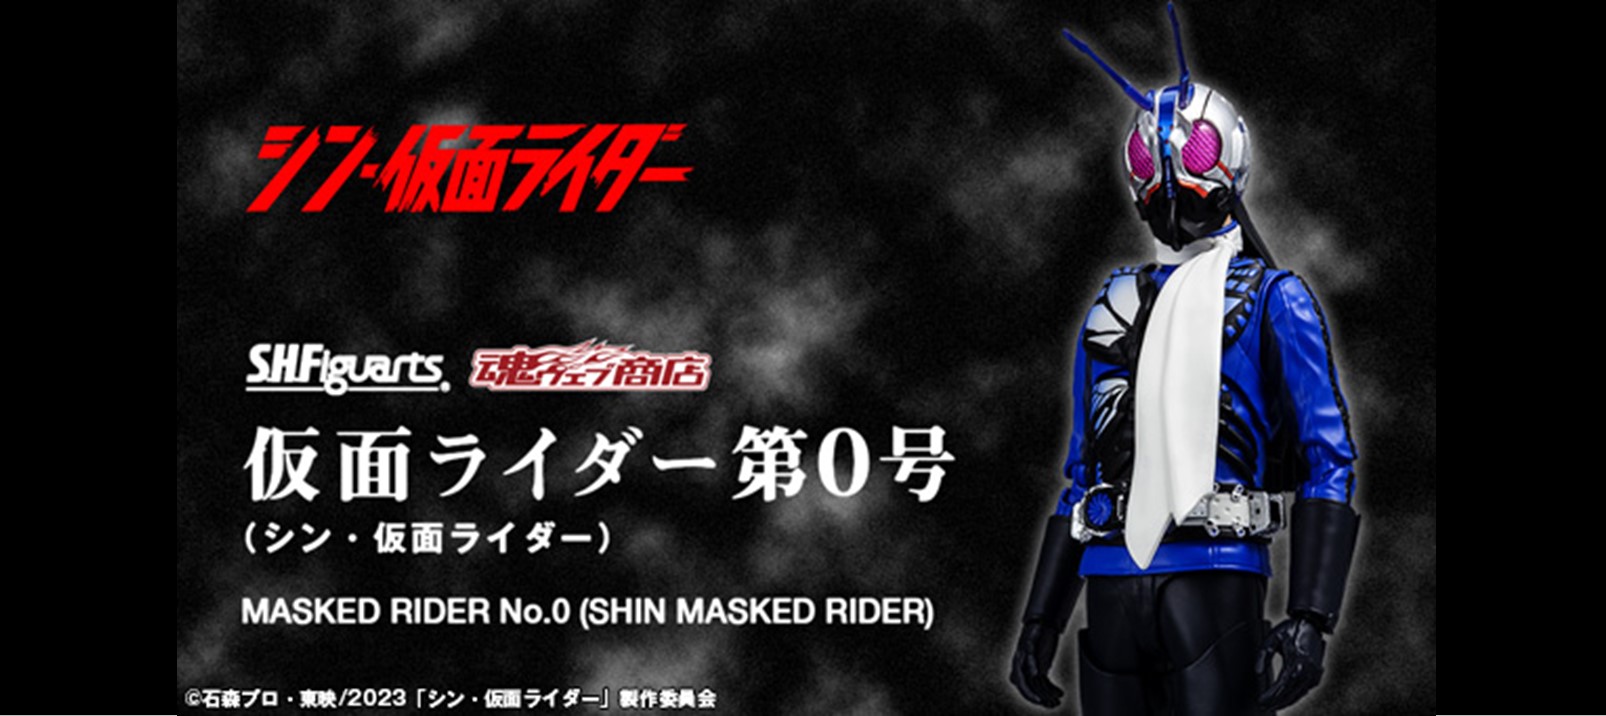 S.H.Figuarts 仮面ライダー第0号（シン・仮面ライダー）が予約受付開始